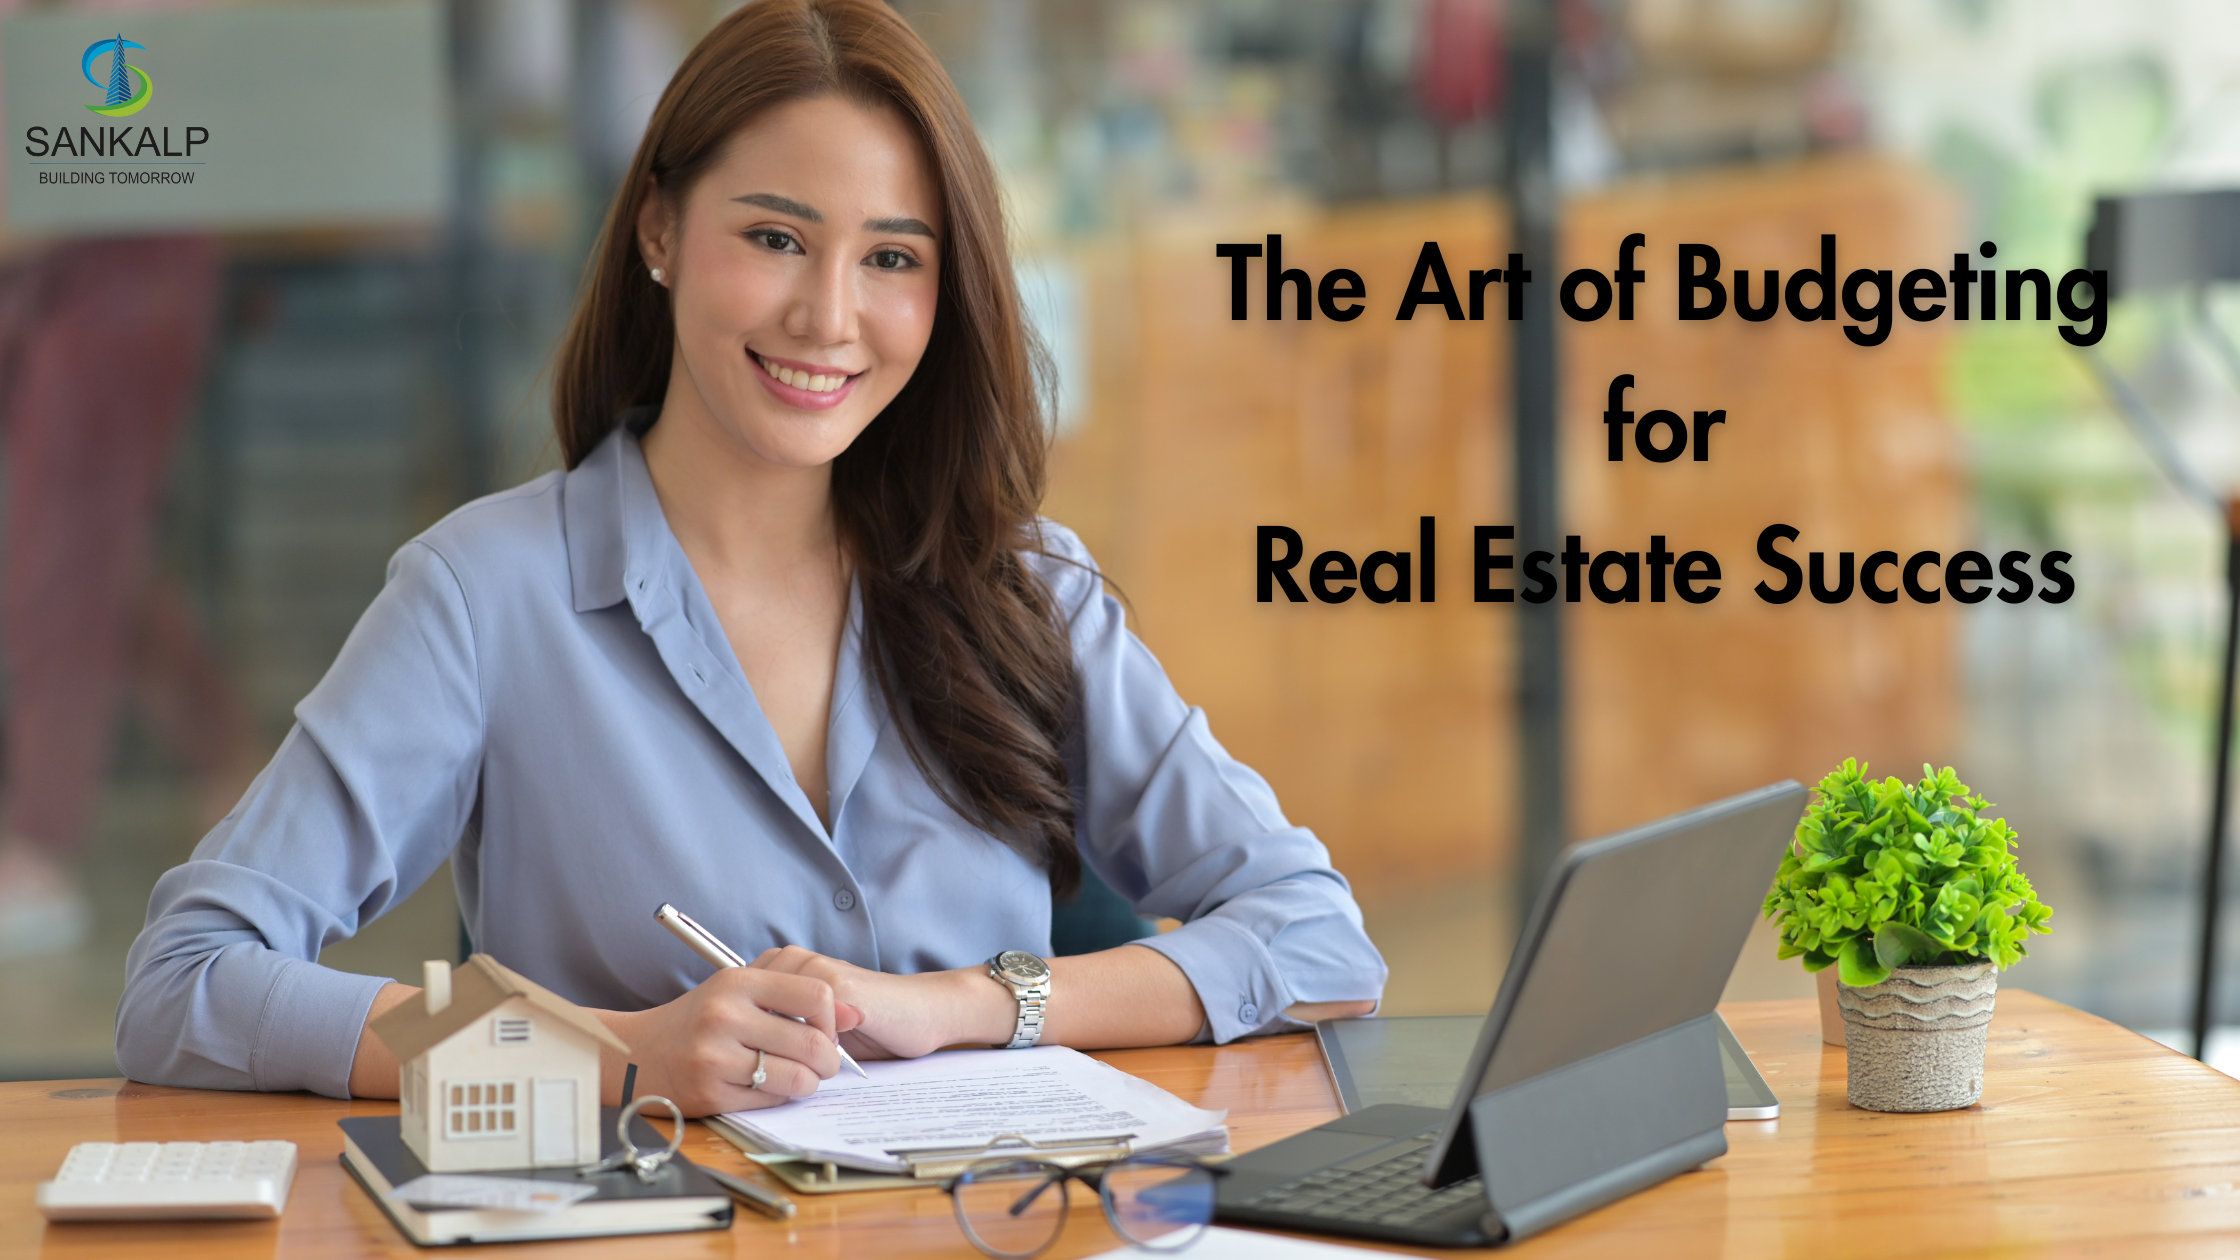 The Art of Budgeting for Real Estate Success